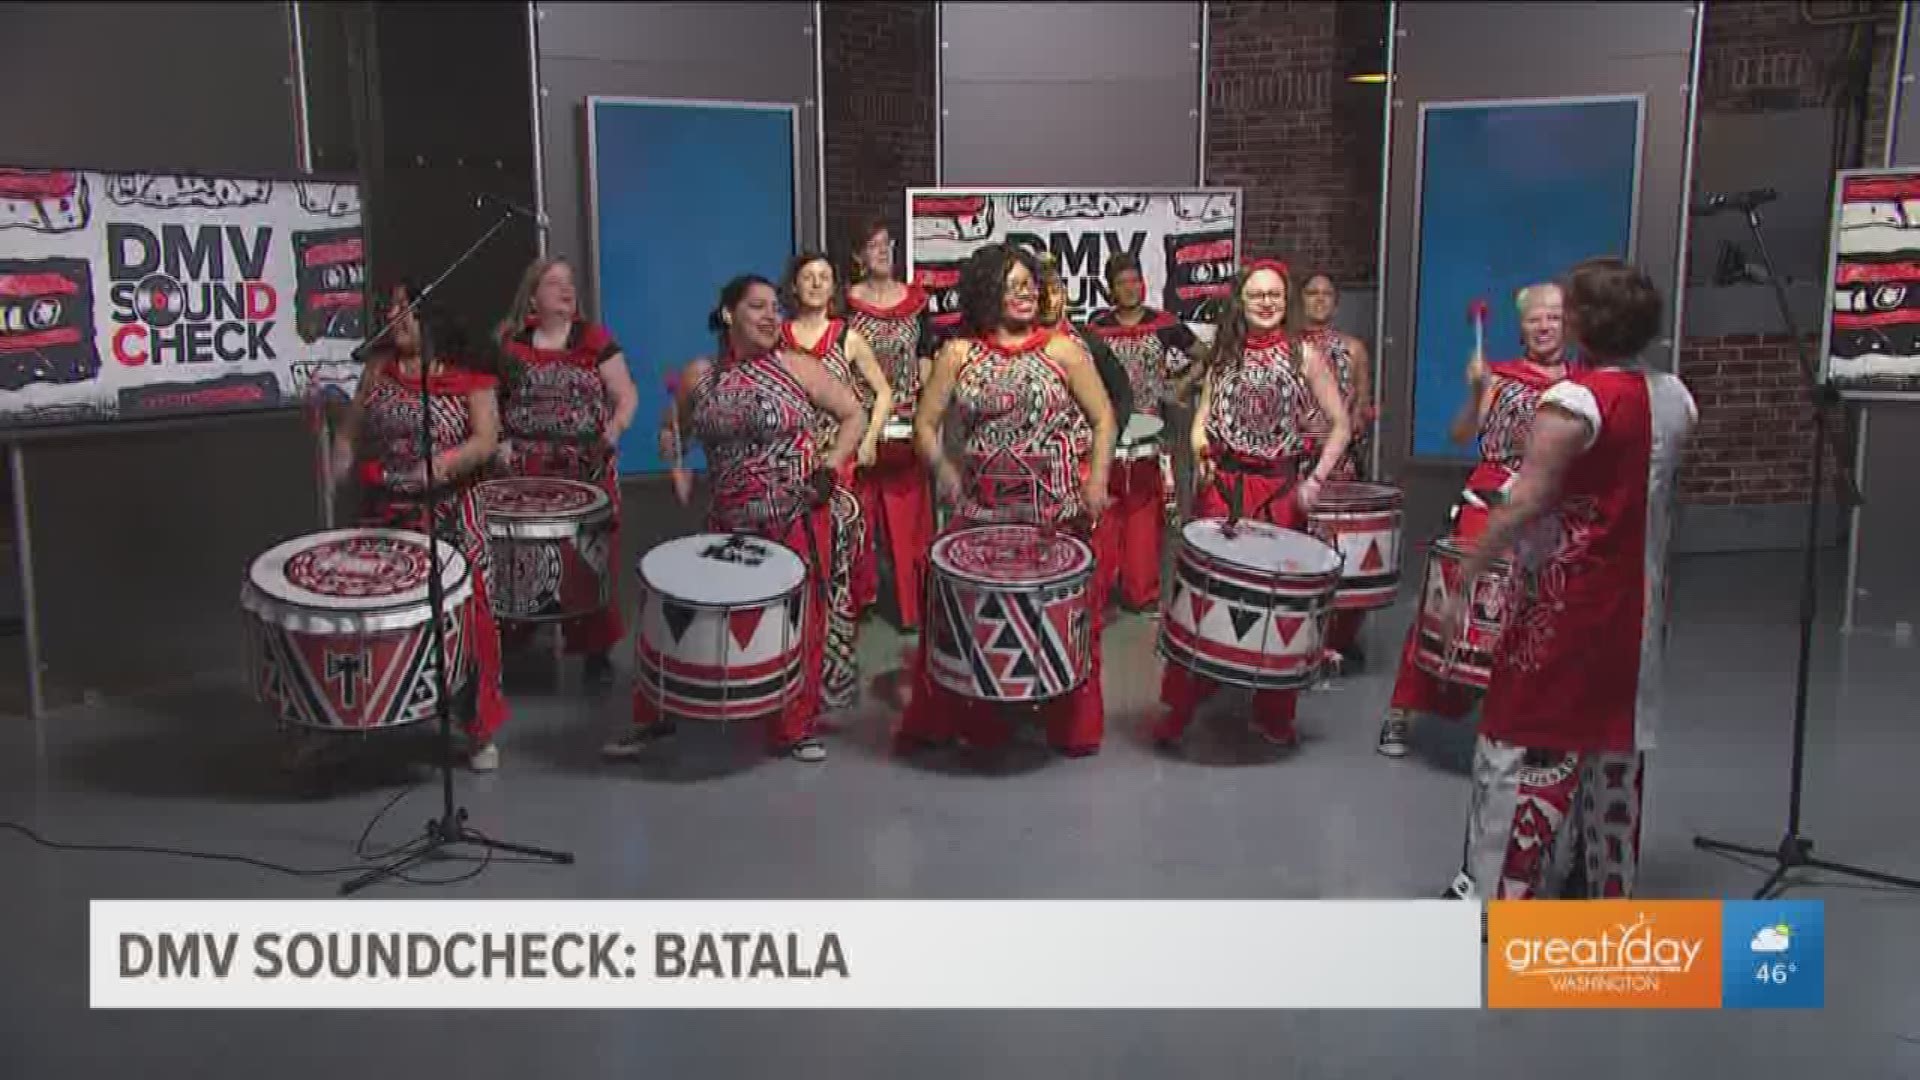 Originally birthed in Paris in 1997, the woman dominated percussion band Batala was introduced to Washington, DC in 2007. The goal of Batala is to expose the DMV to Afro Bahian culture and Samba Reggae music, all while empowering women through playing these rhythmic tunes.